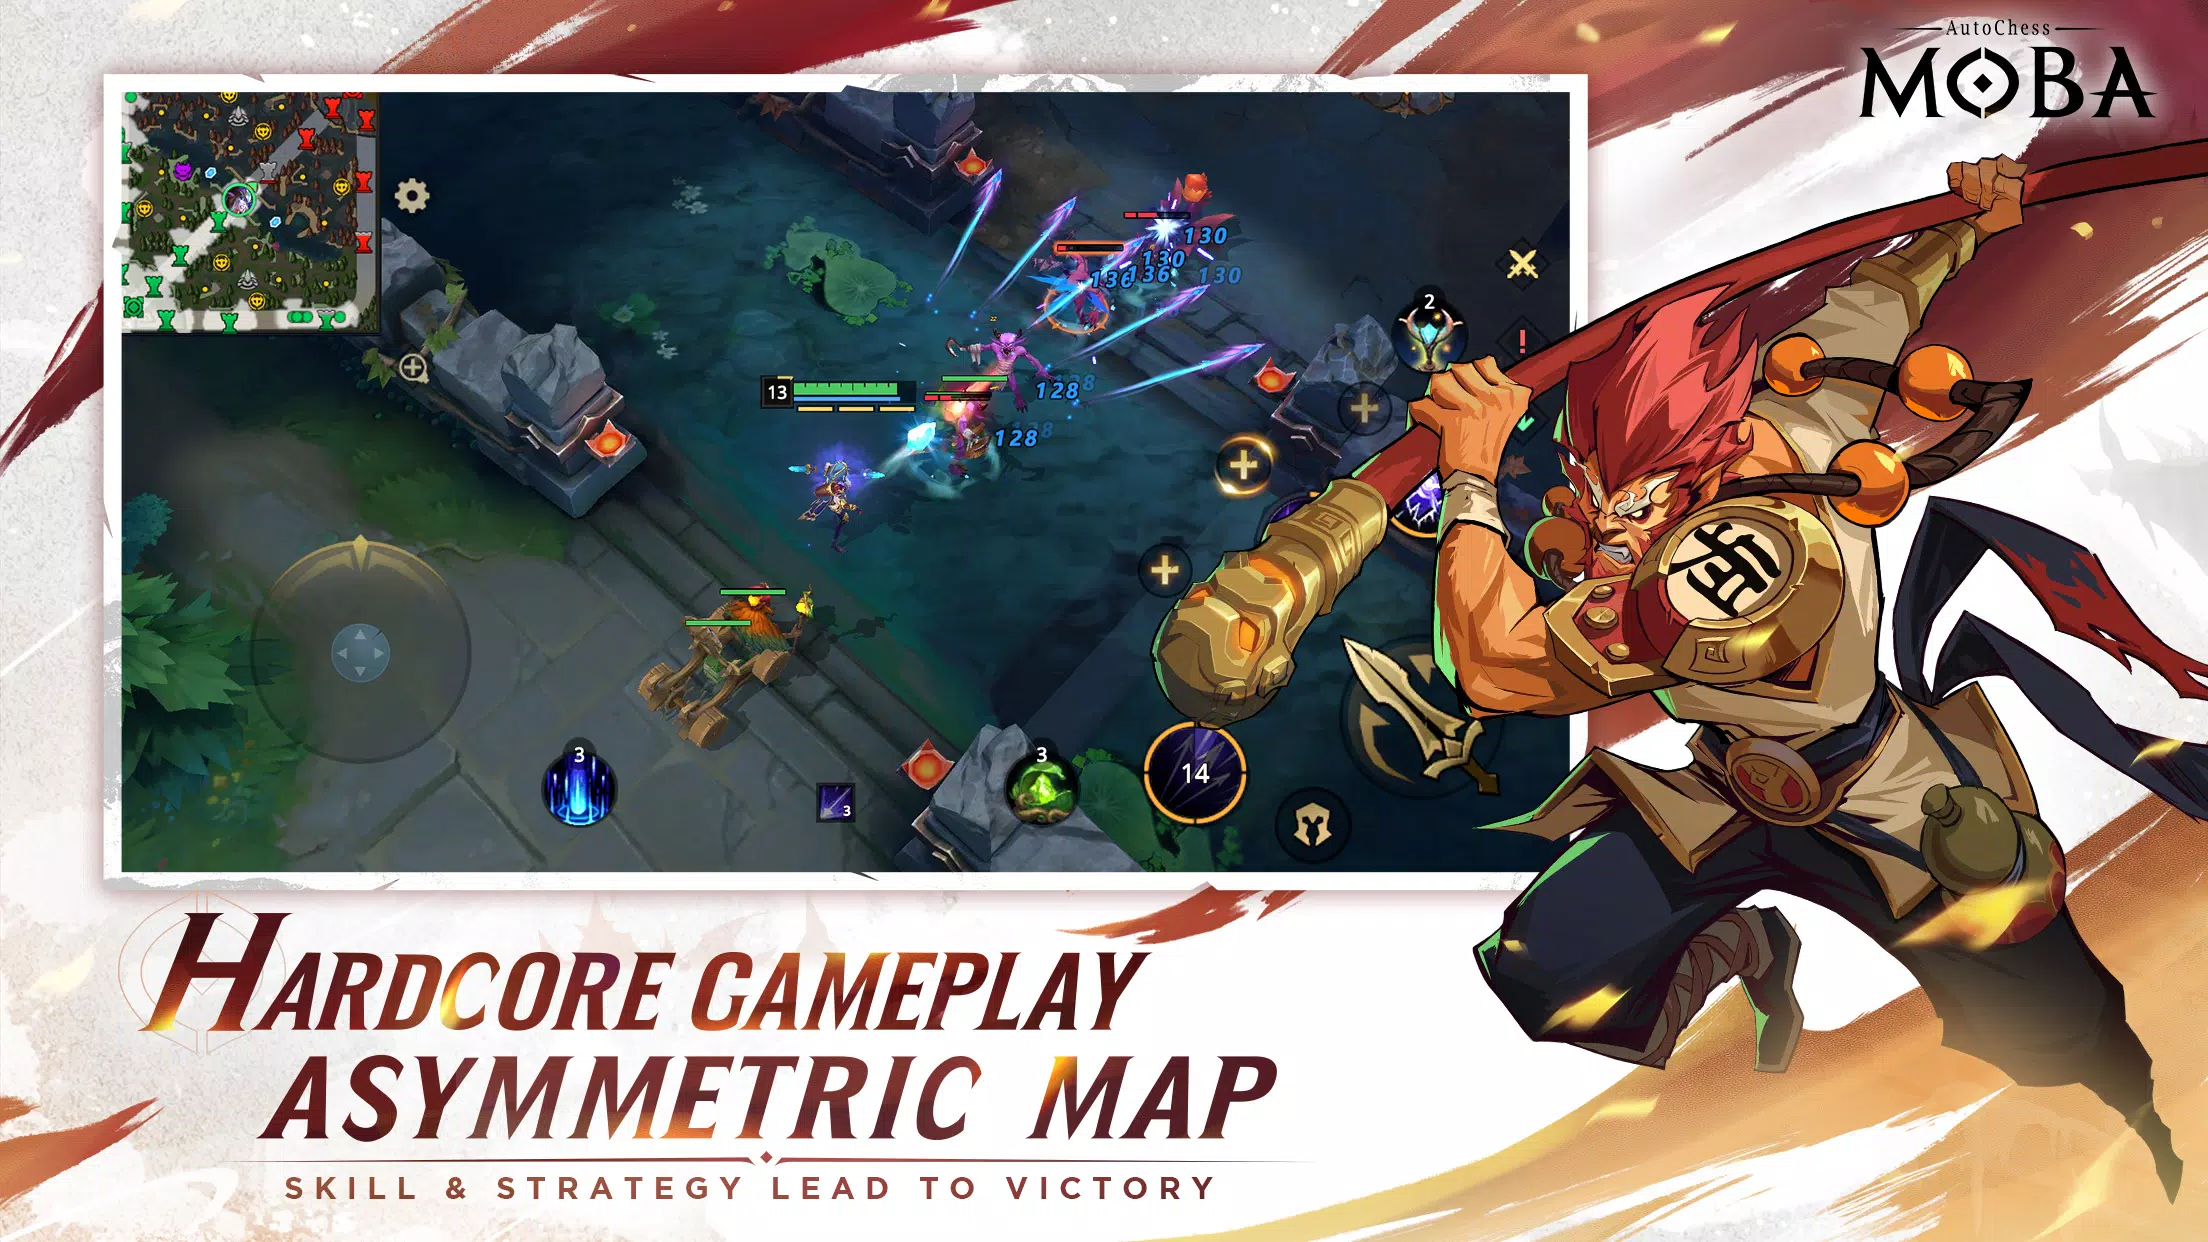 Download game Auto Chess MOBA for free Android and IOS